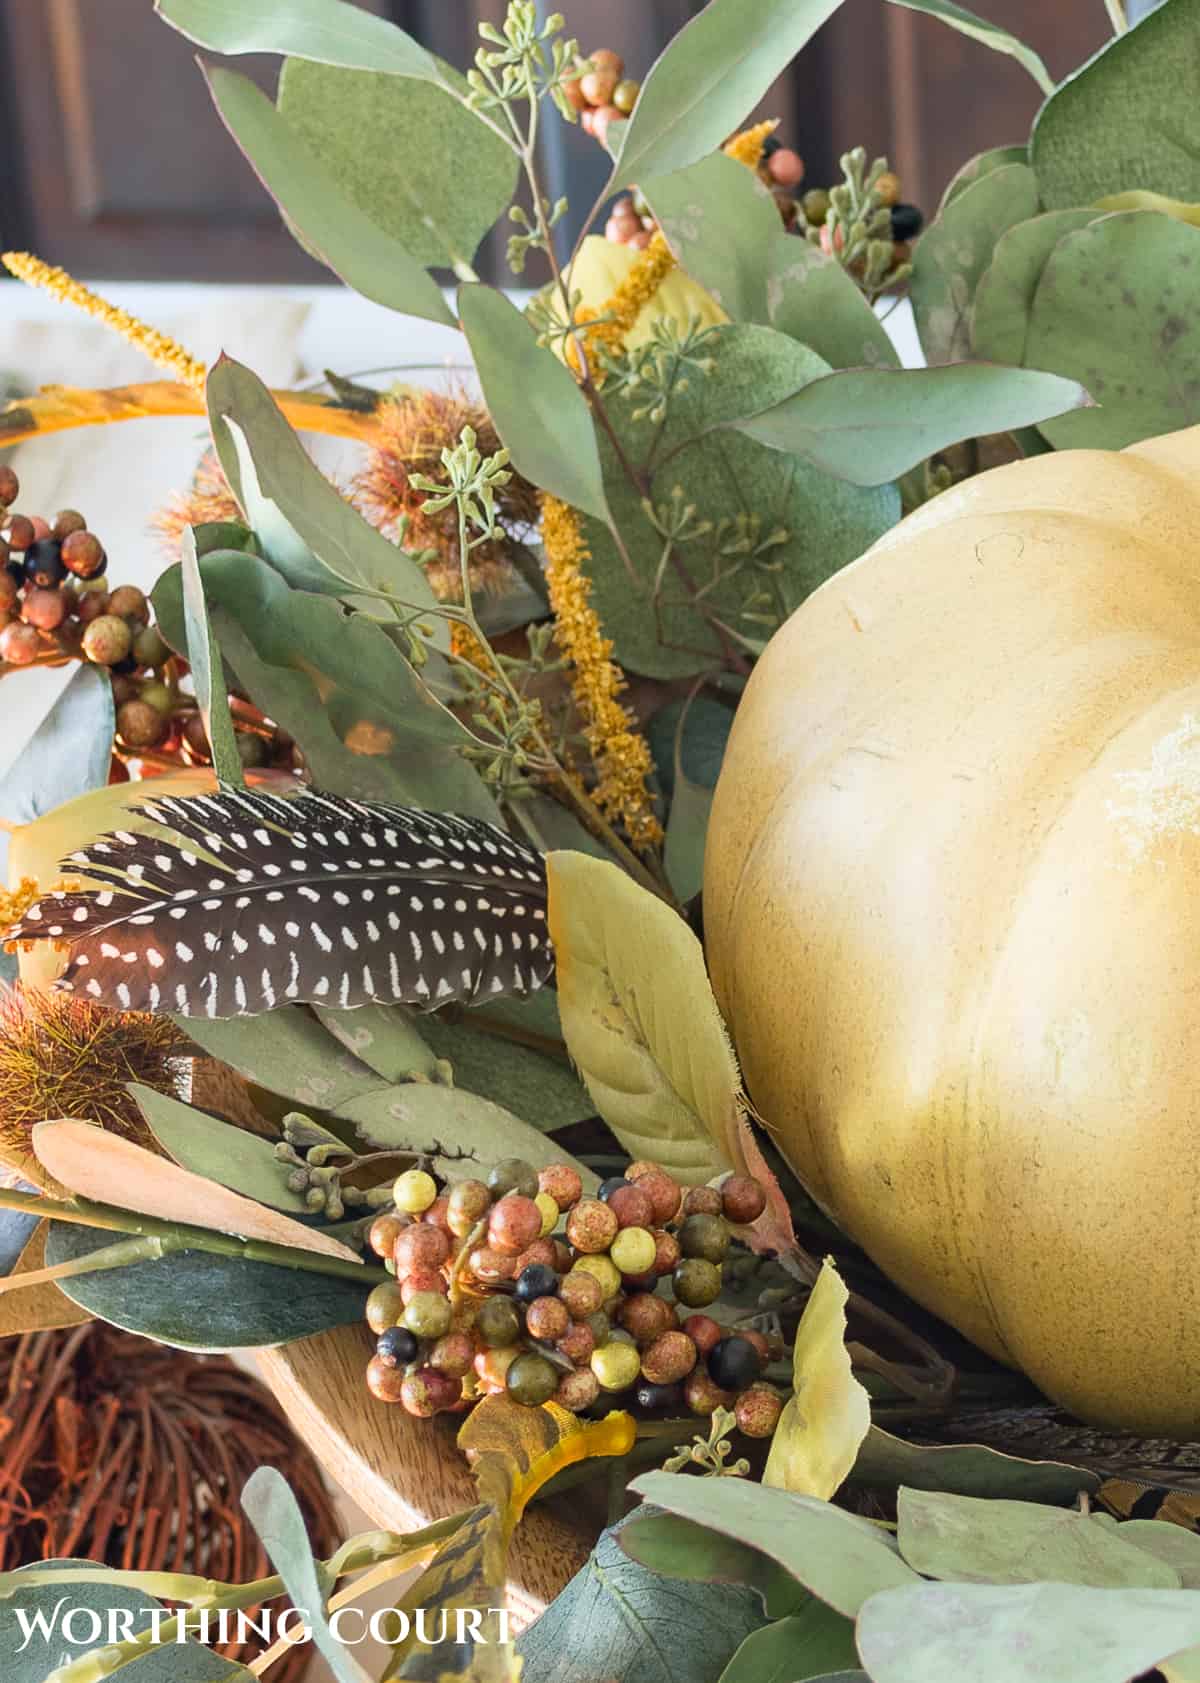 Thanksgiving centerpiece with cream colored pumpkin on a wooden pedestal surrounded by bits of greenery and feathers